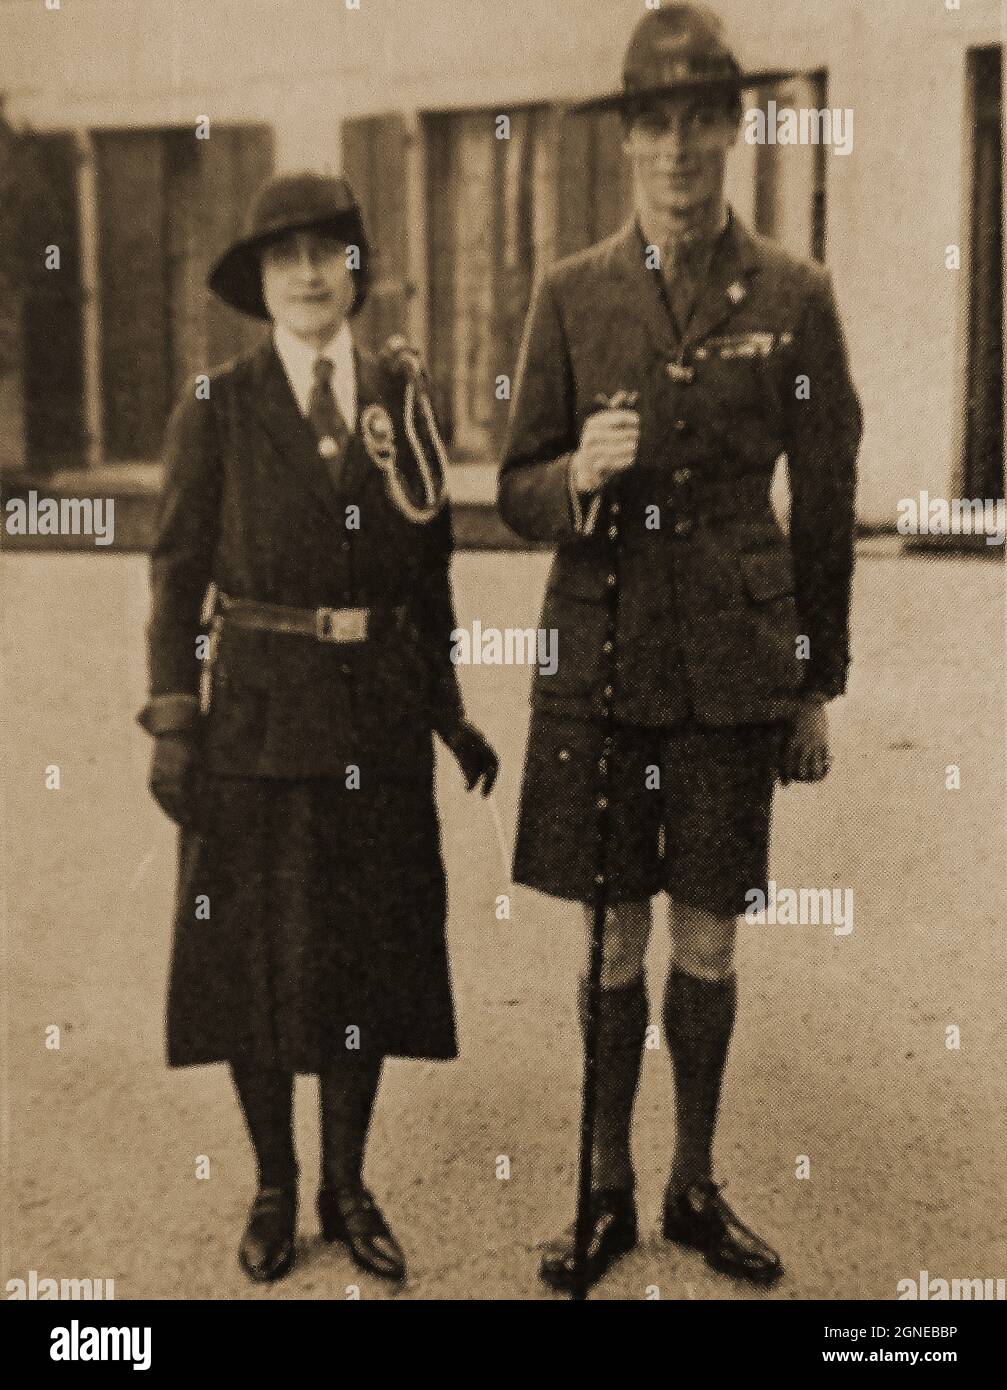 A rare 1930's snapshot of King George VI and Queen Elizabeth in scout & guide uniforms. Stock Photo